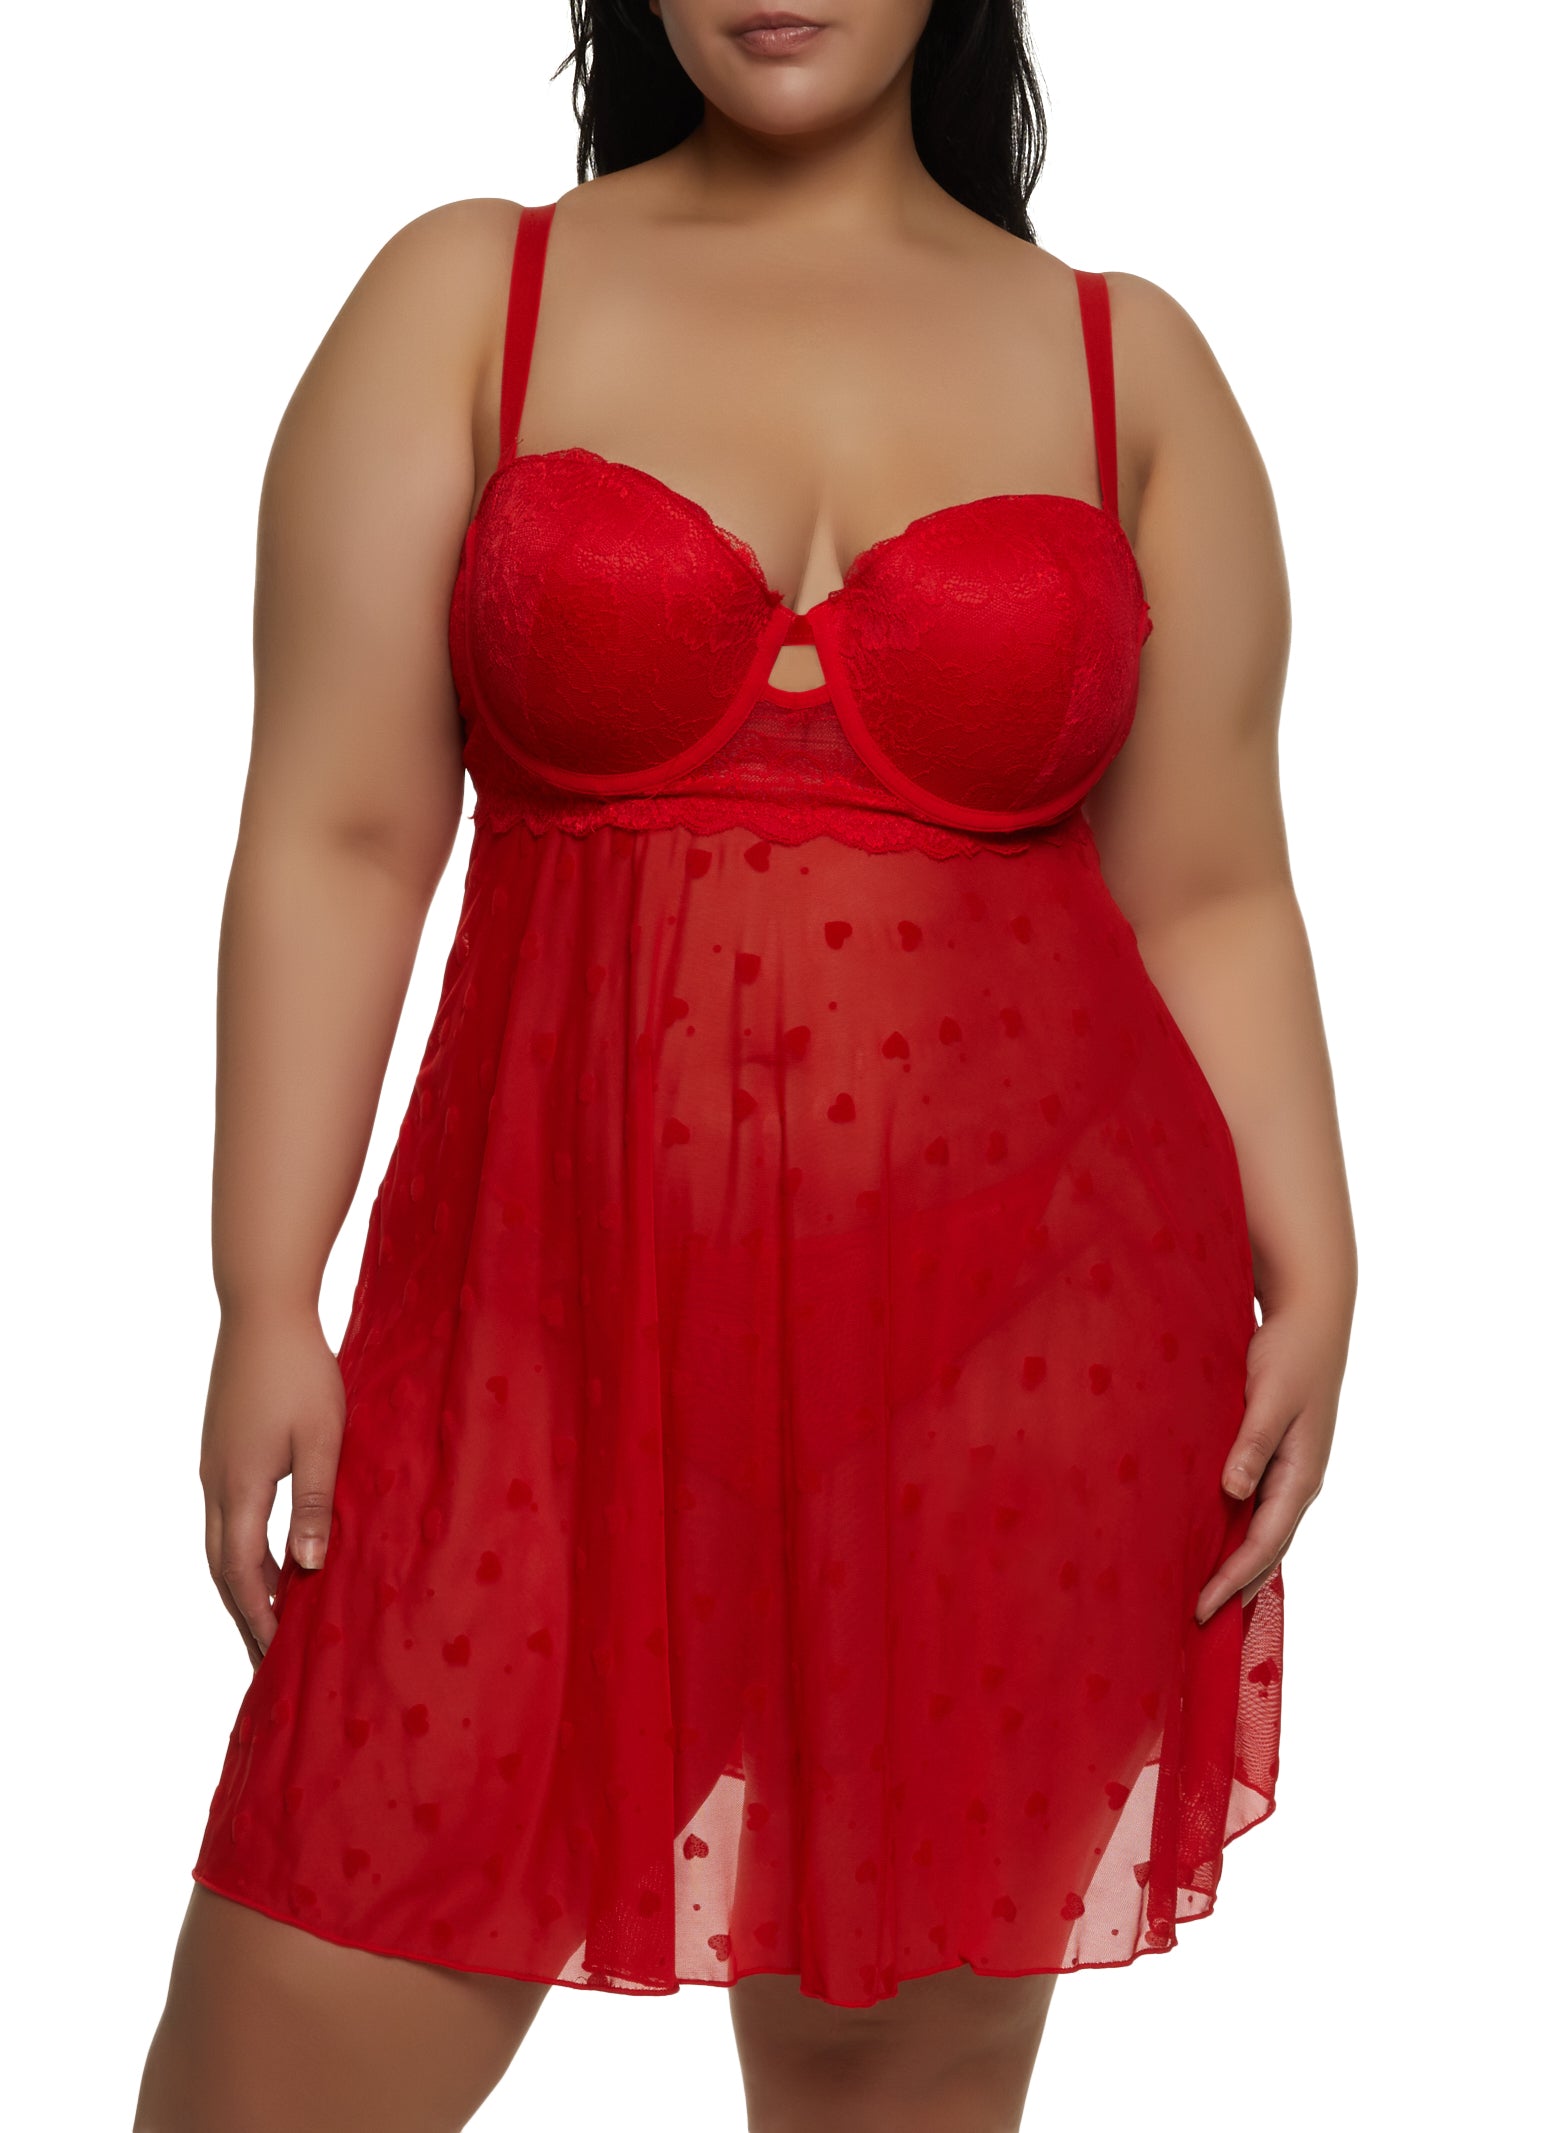 Plus Size Red Lingerie, Everyday Low Prices